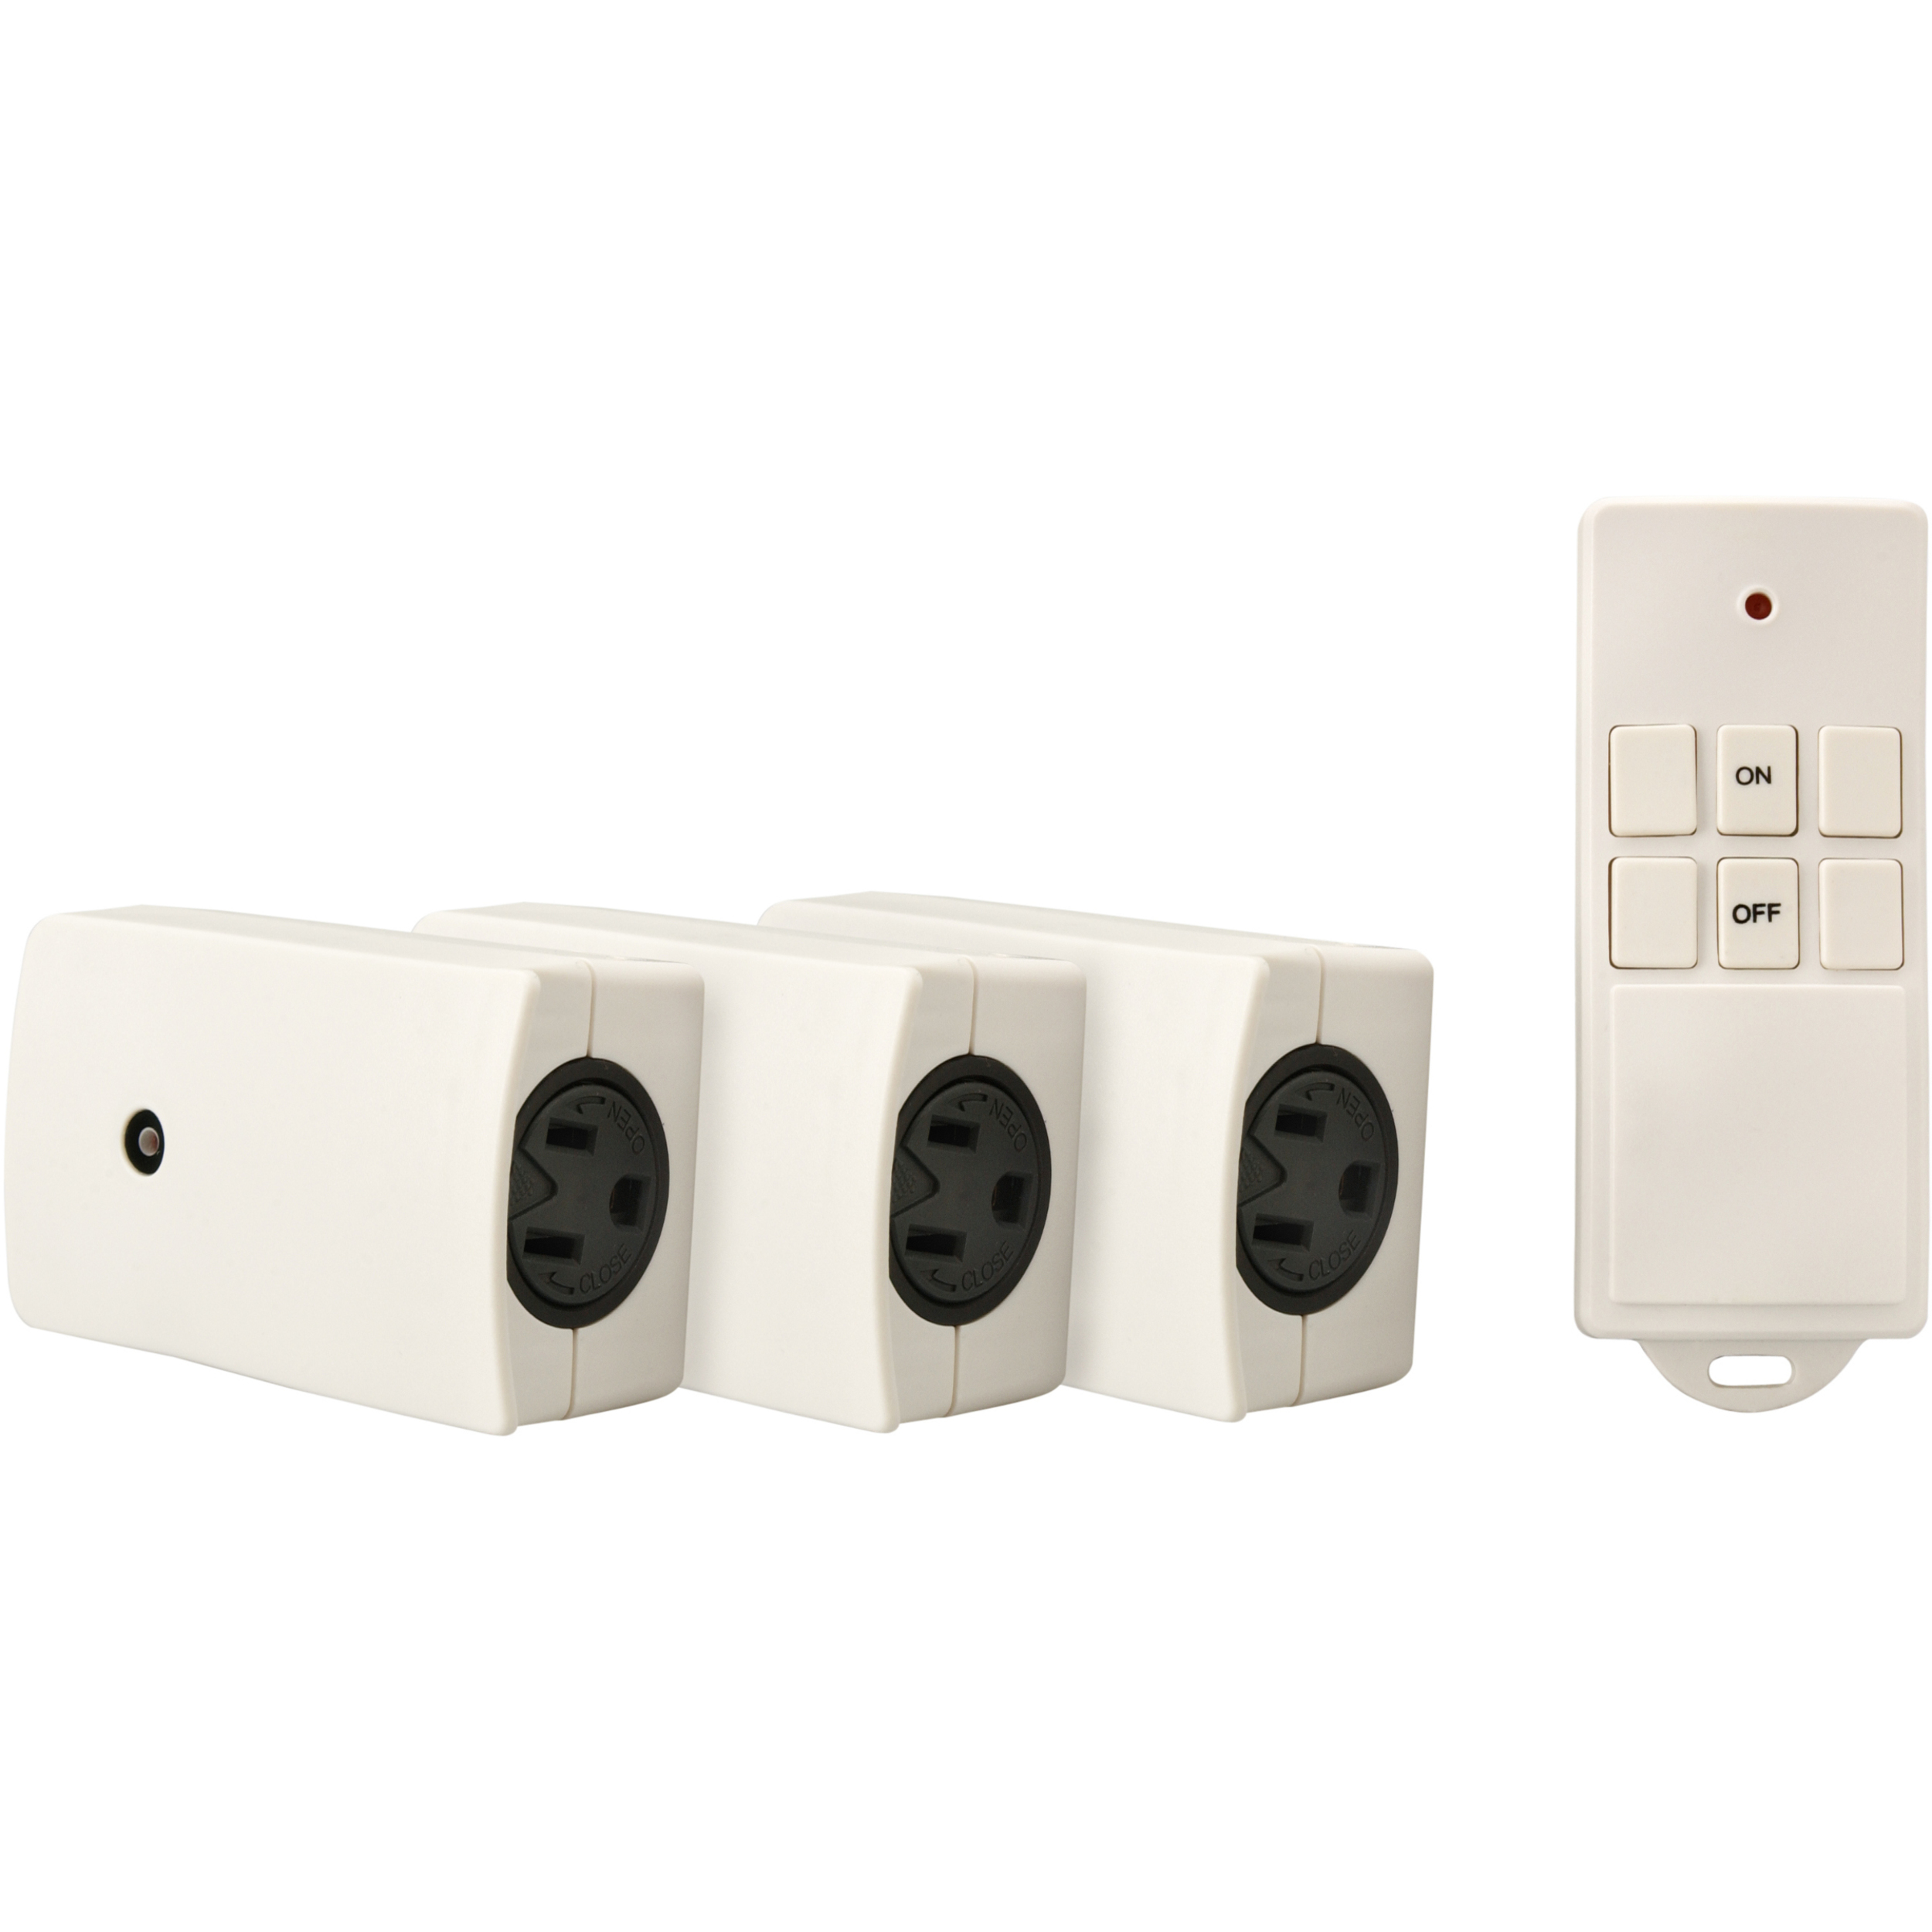 Woods Indoor Wireless Remote Control with 3 Outlets, White, 3-Pack - image 1 of 10